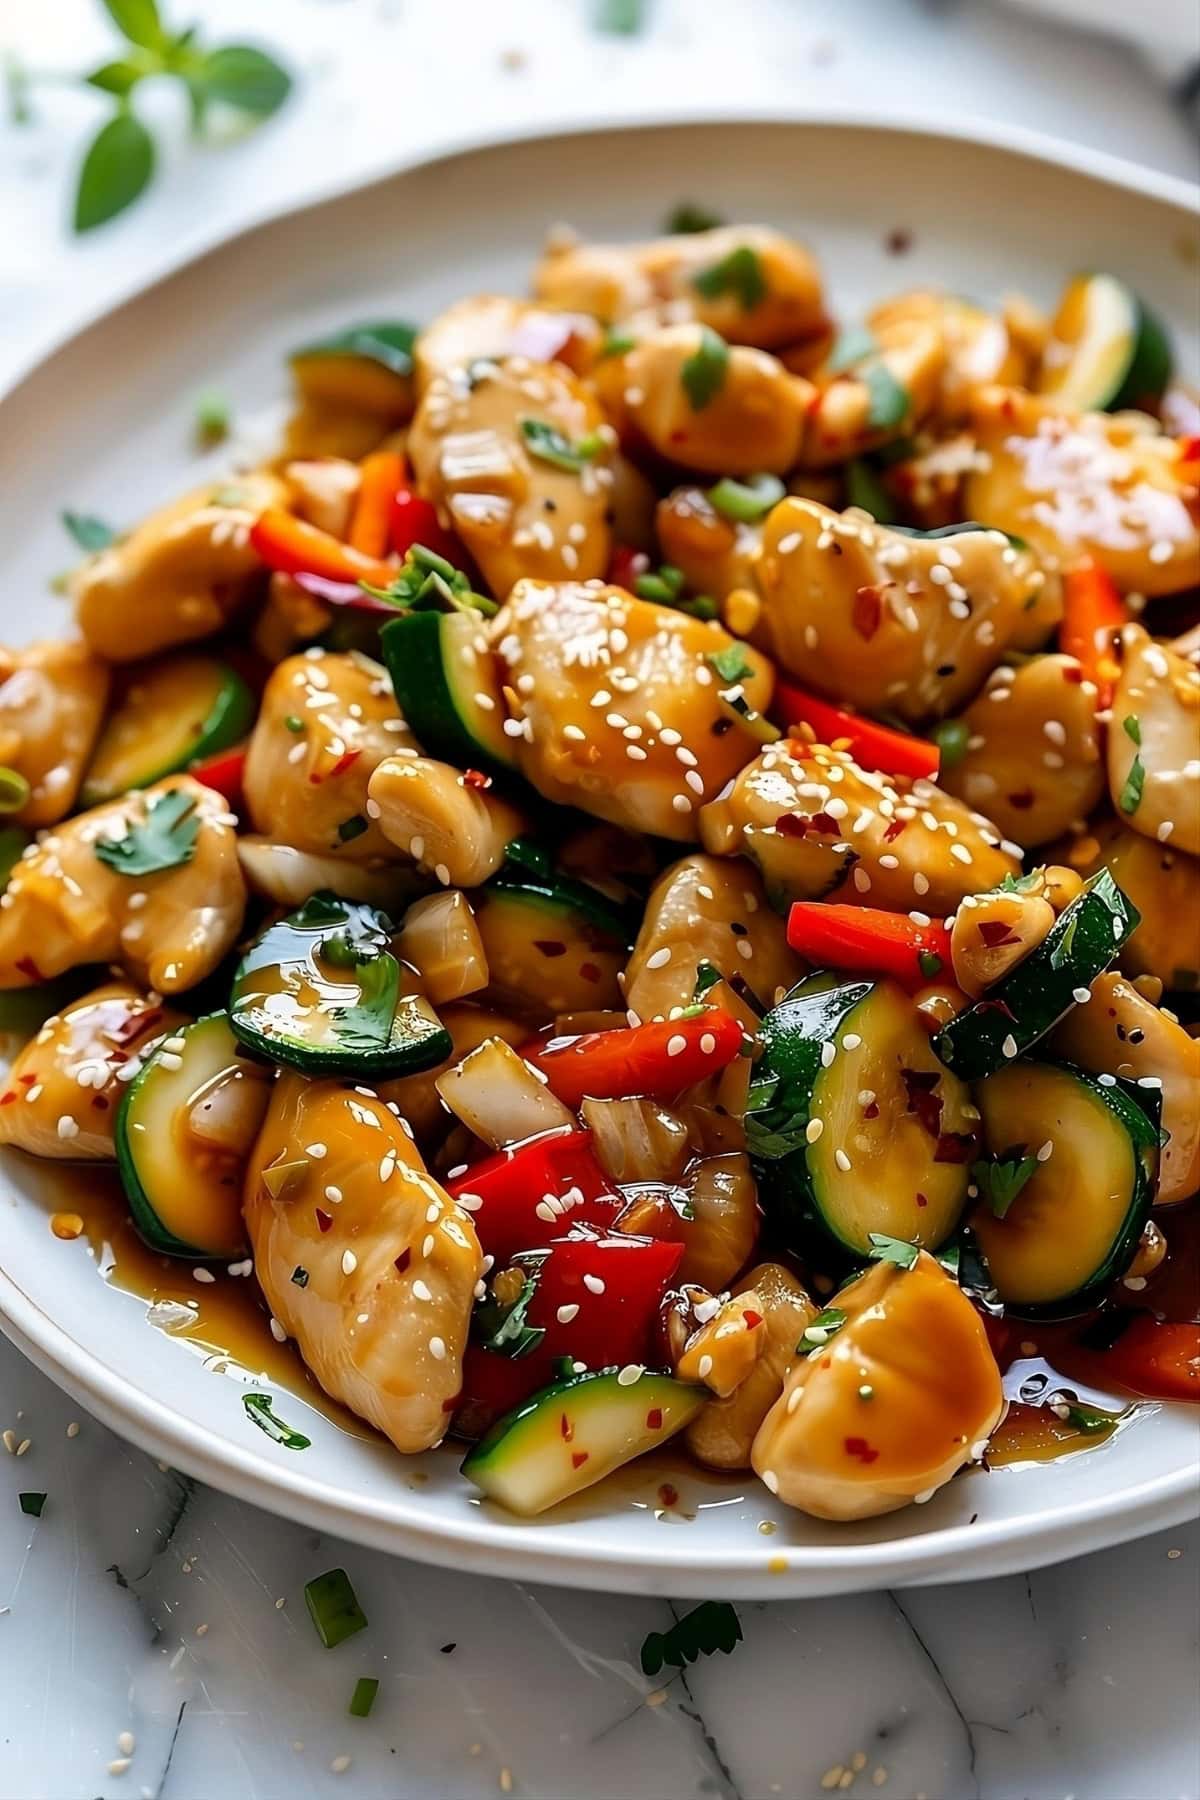 Saucy stir-fried chicken with zucchini and bell pepper in a plate.